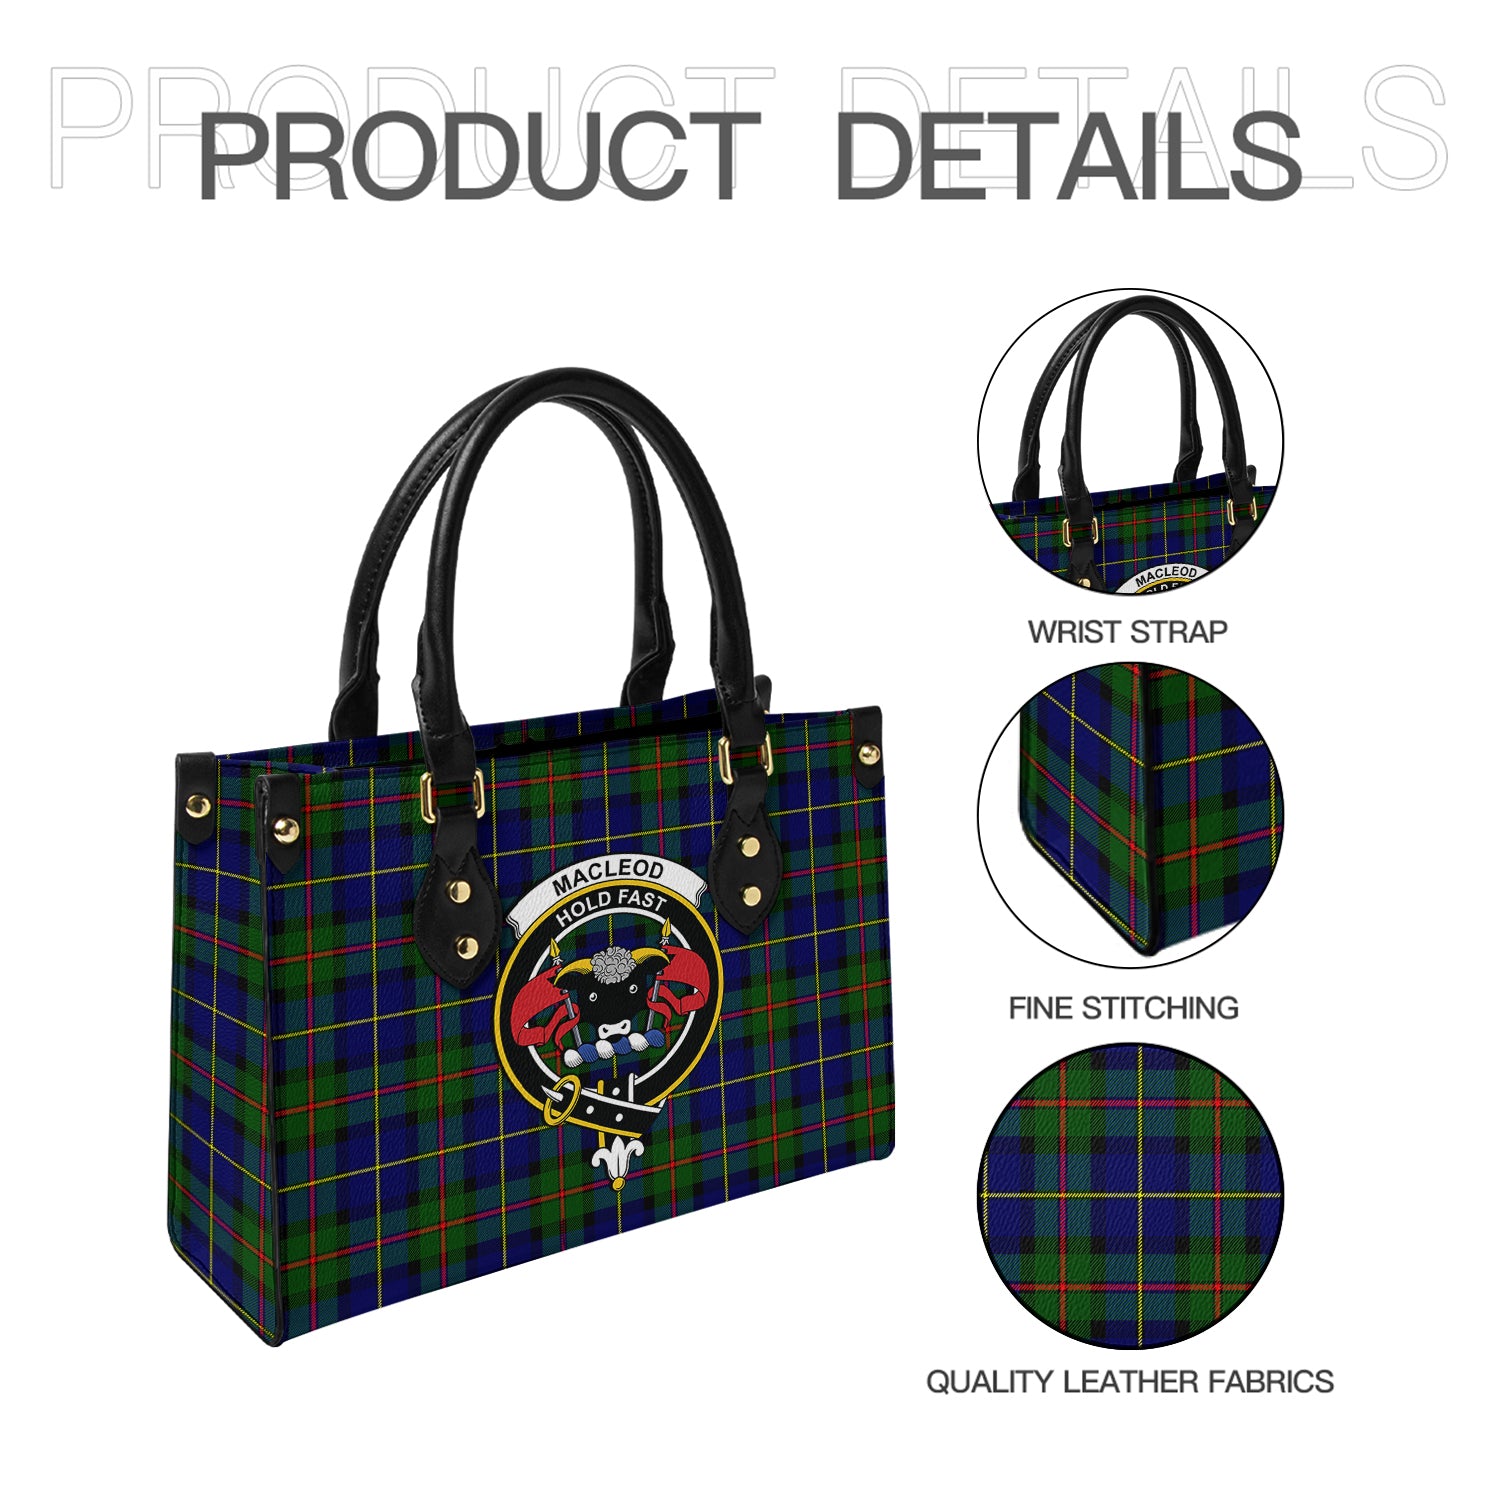 macleod-of-harris-modern-tartan-leather-bag-with-family-crest